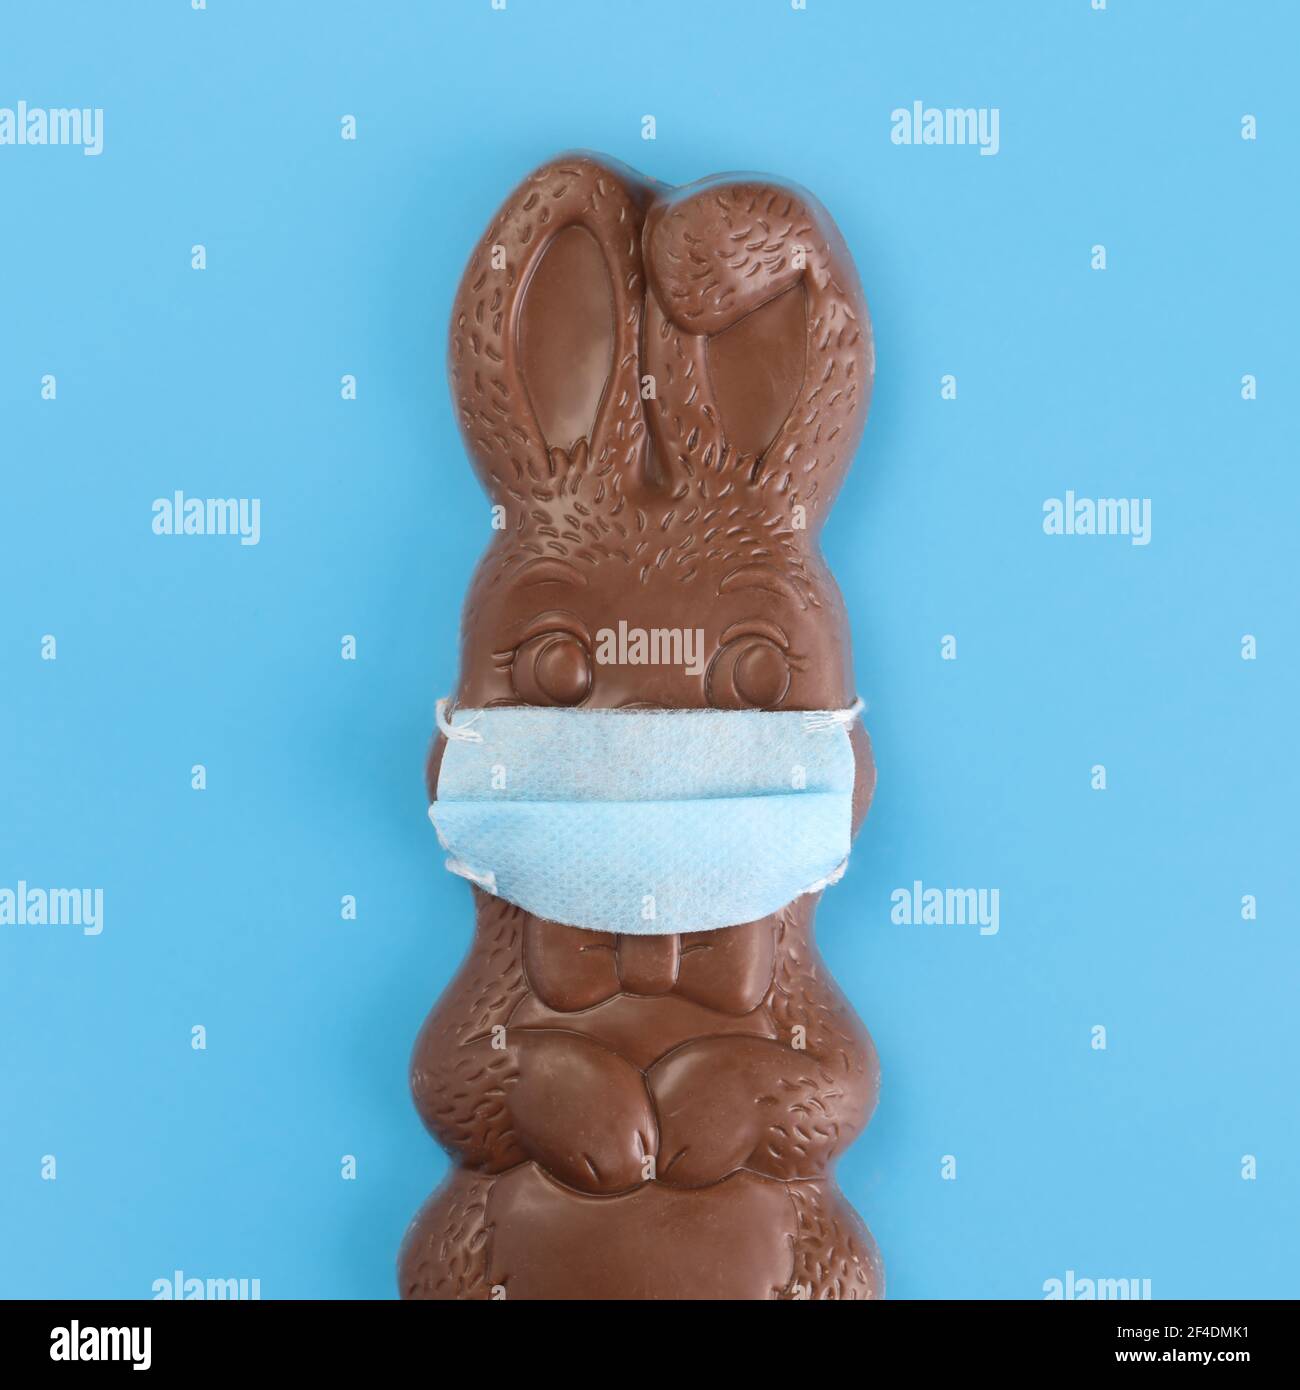 Chocolate Easter bunny wearing a medical mask. Social distancing Easter celebrations due to Covid 19 or Coronavirus safety restrictions. Stock Photo